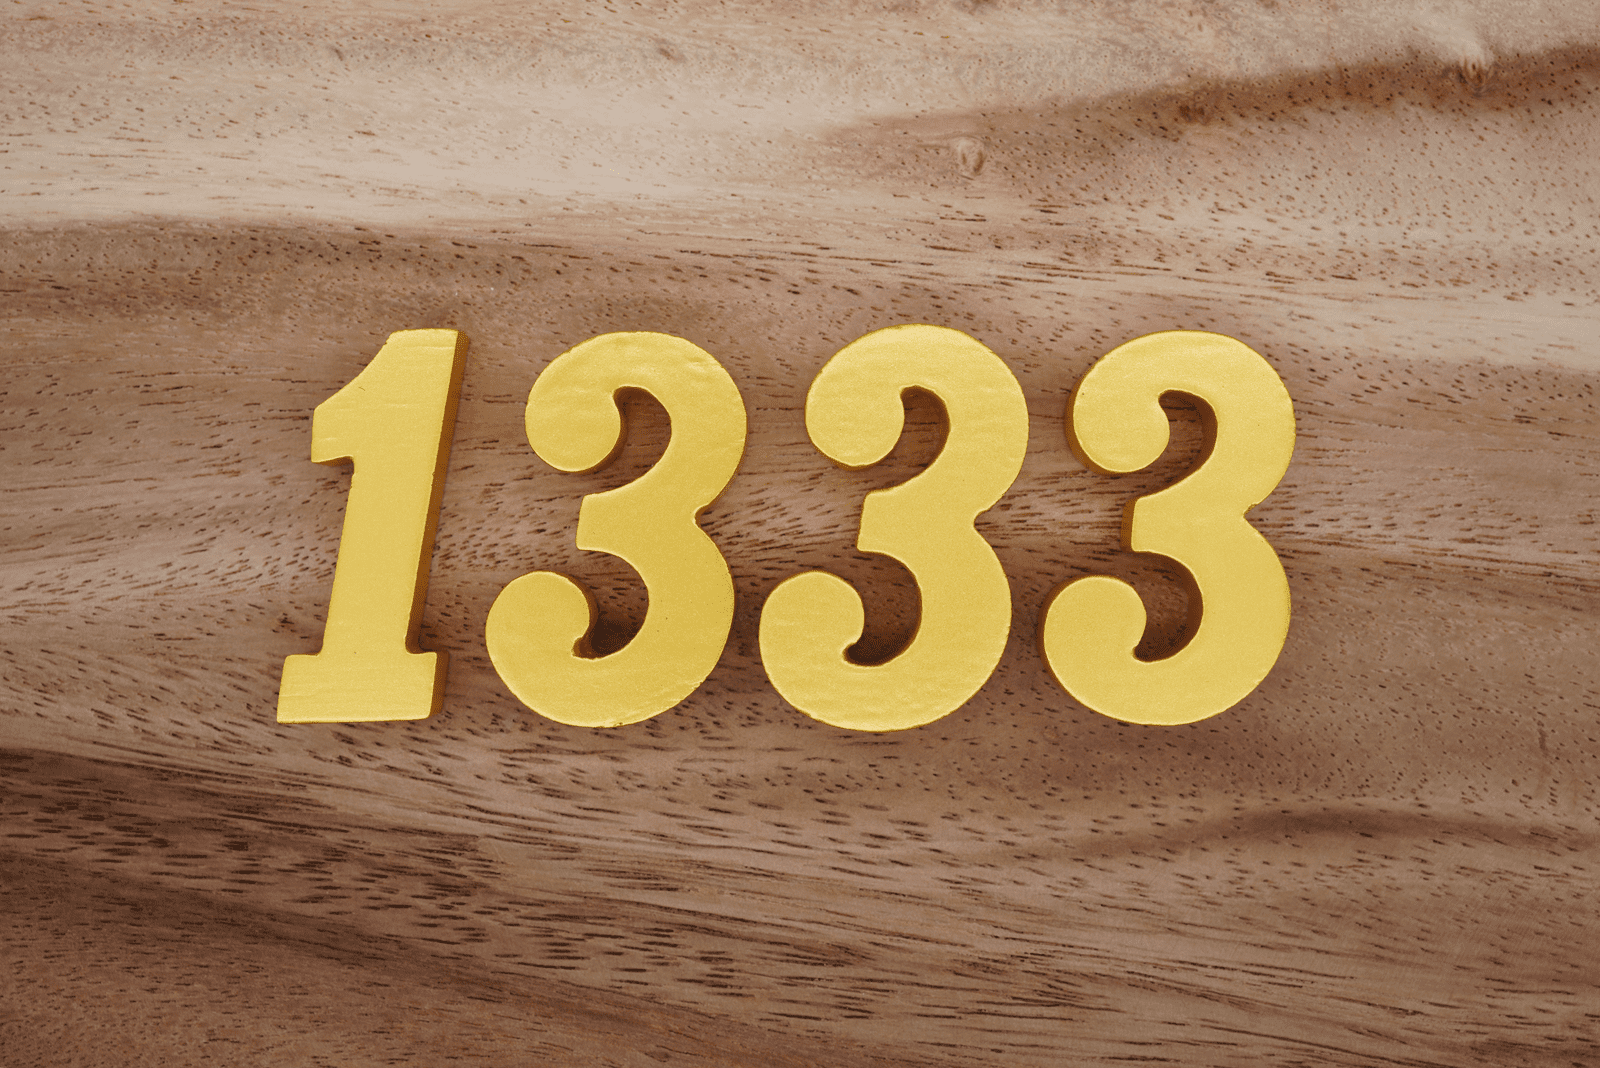 1333 Angel Number Meaning And Why You Keep Seeing It